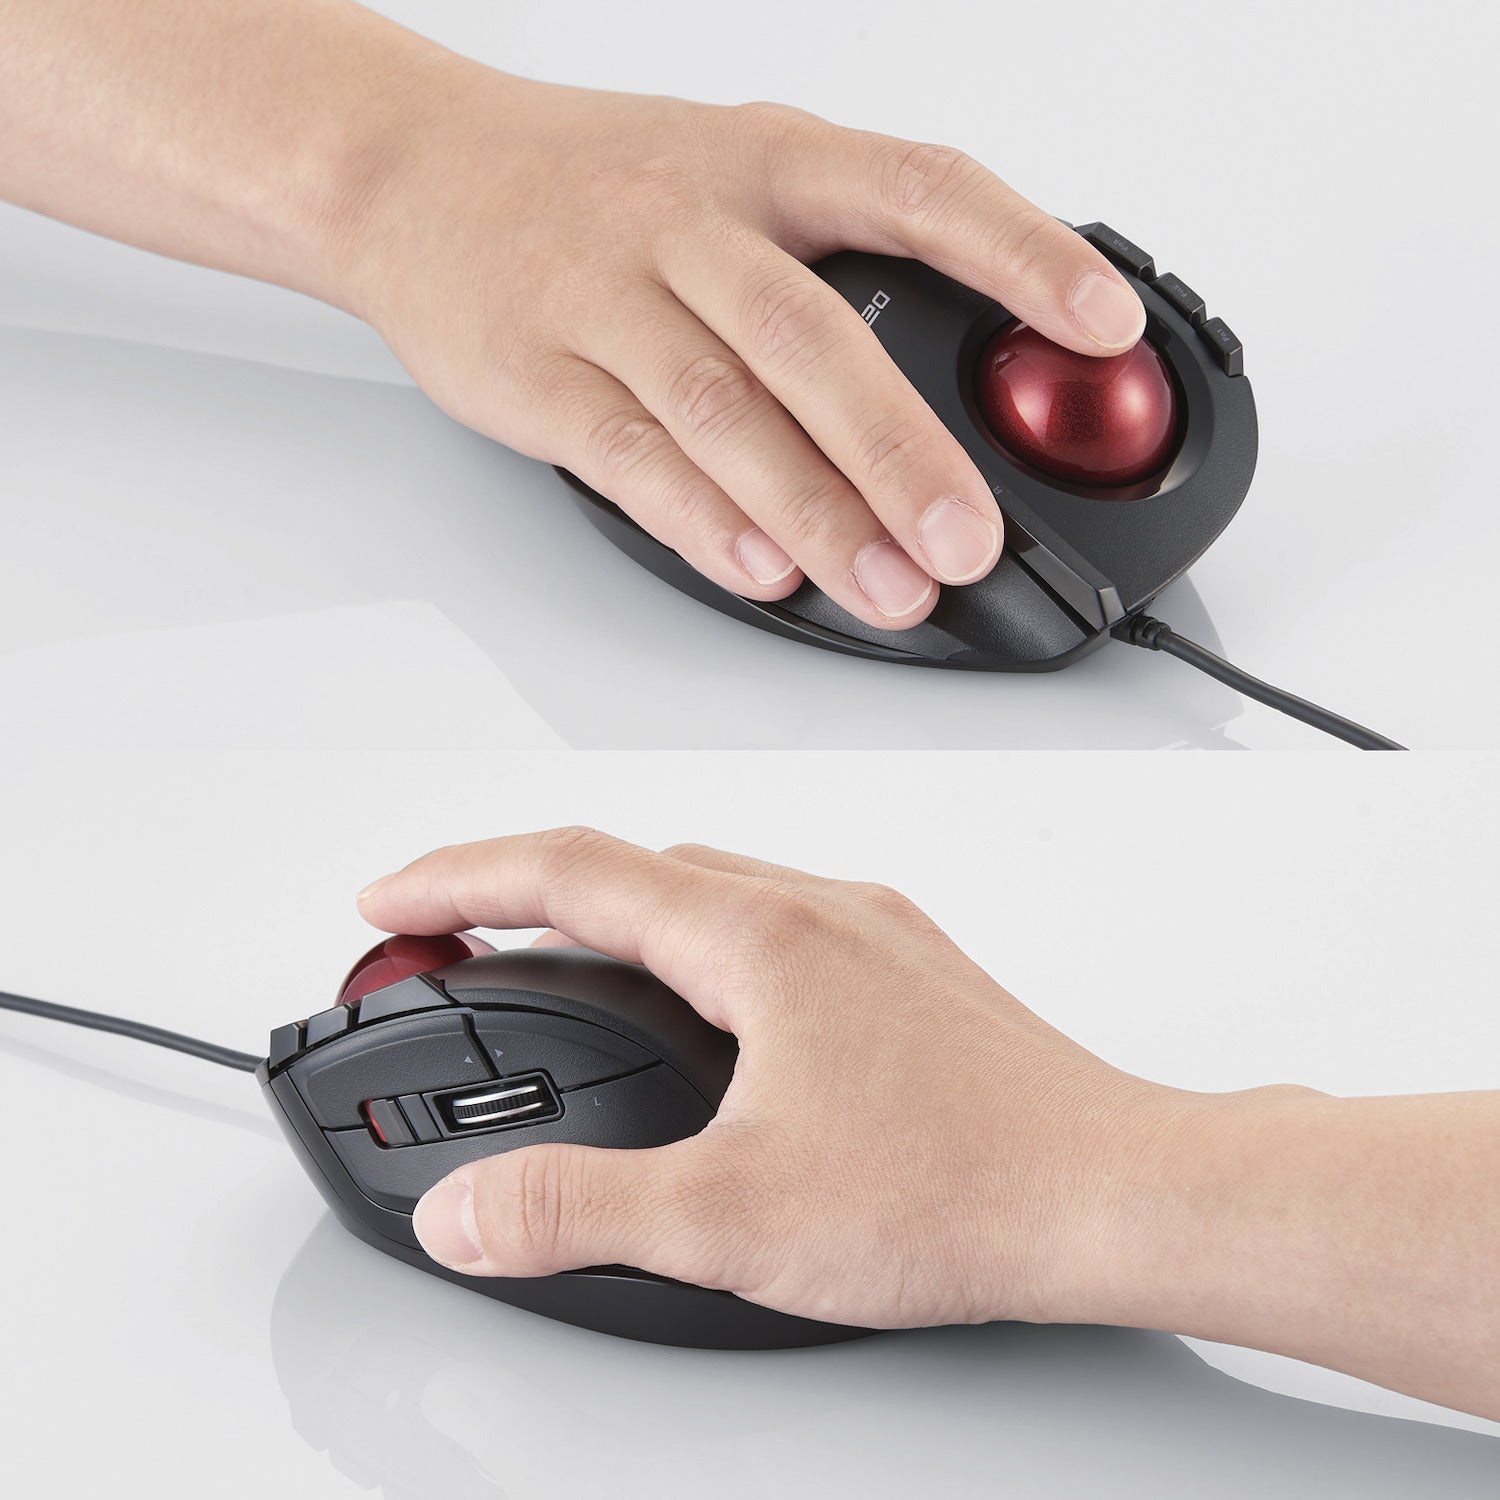 DEFT Wired Trackball Mouse